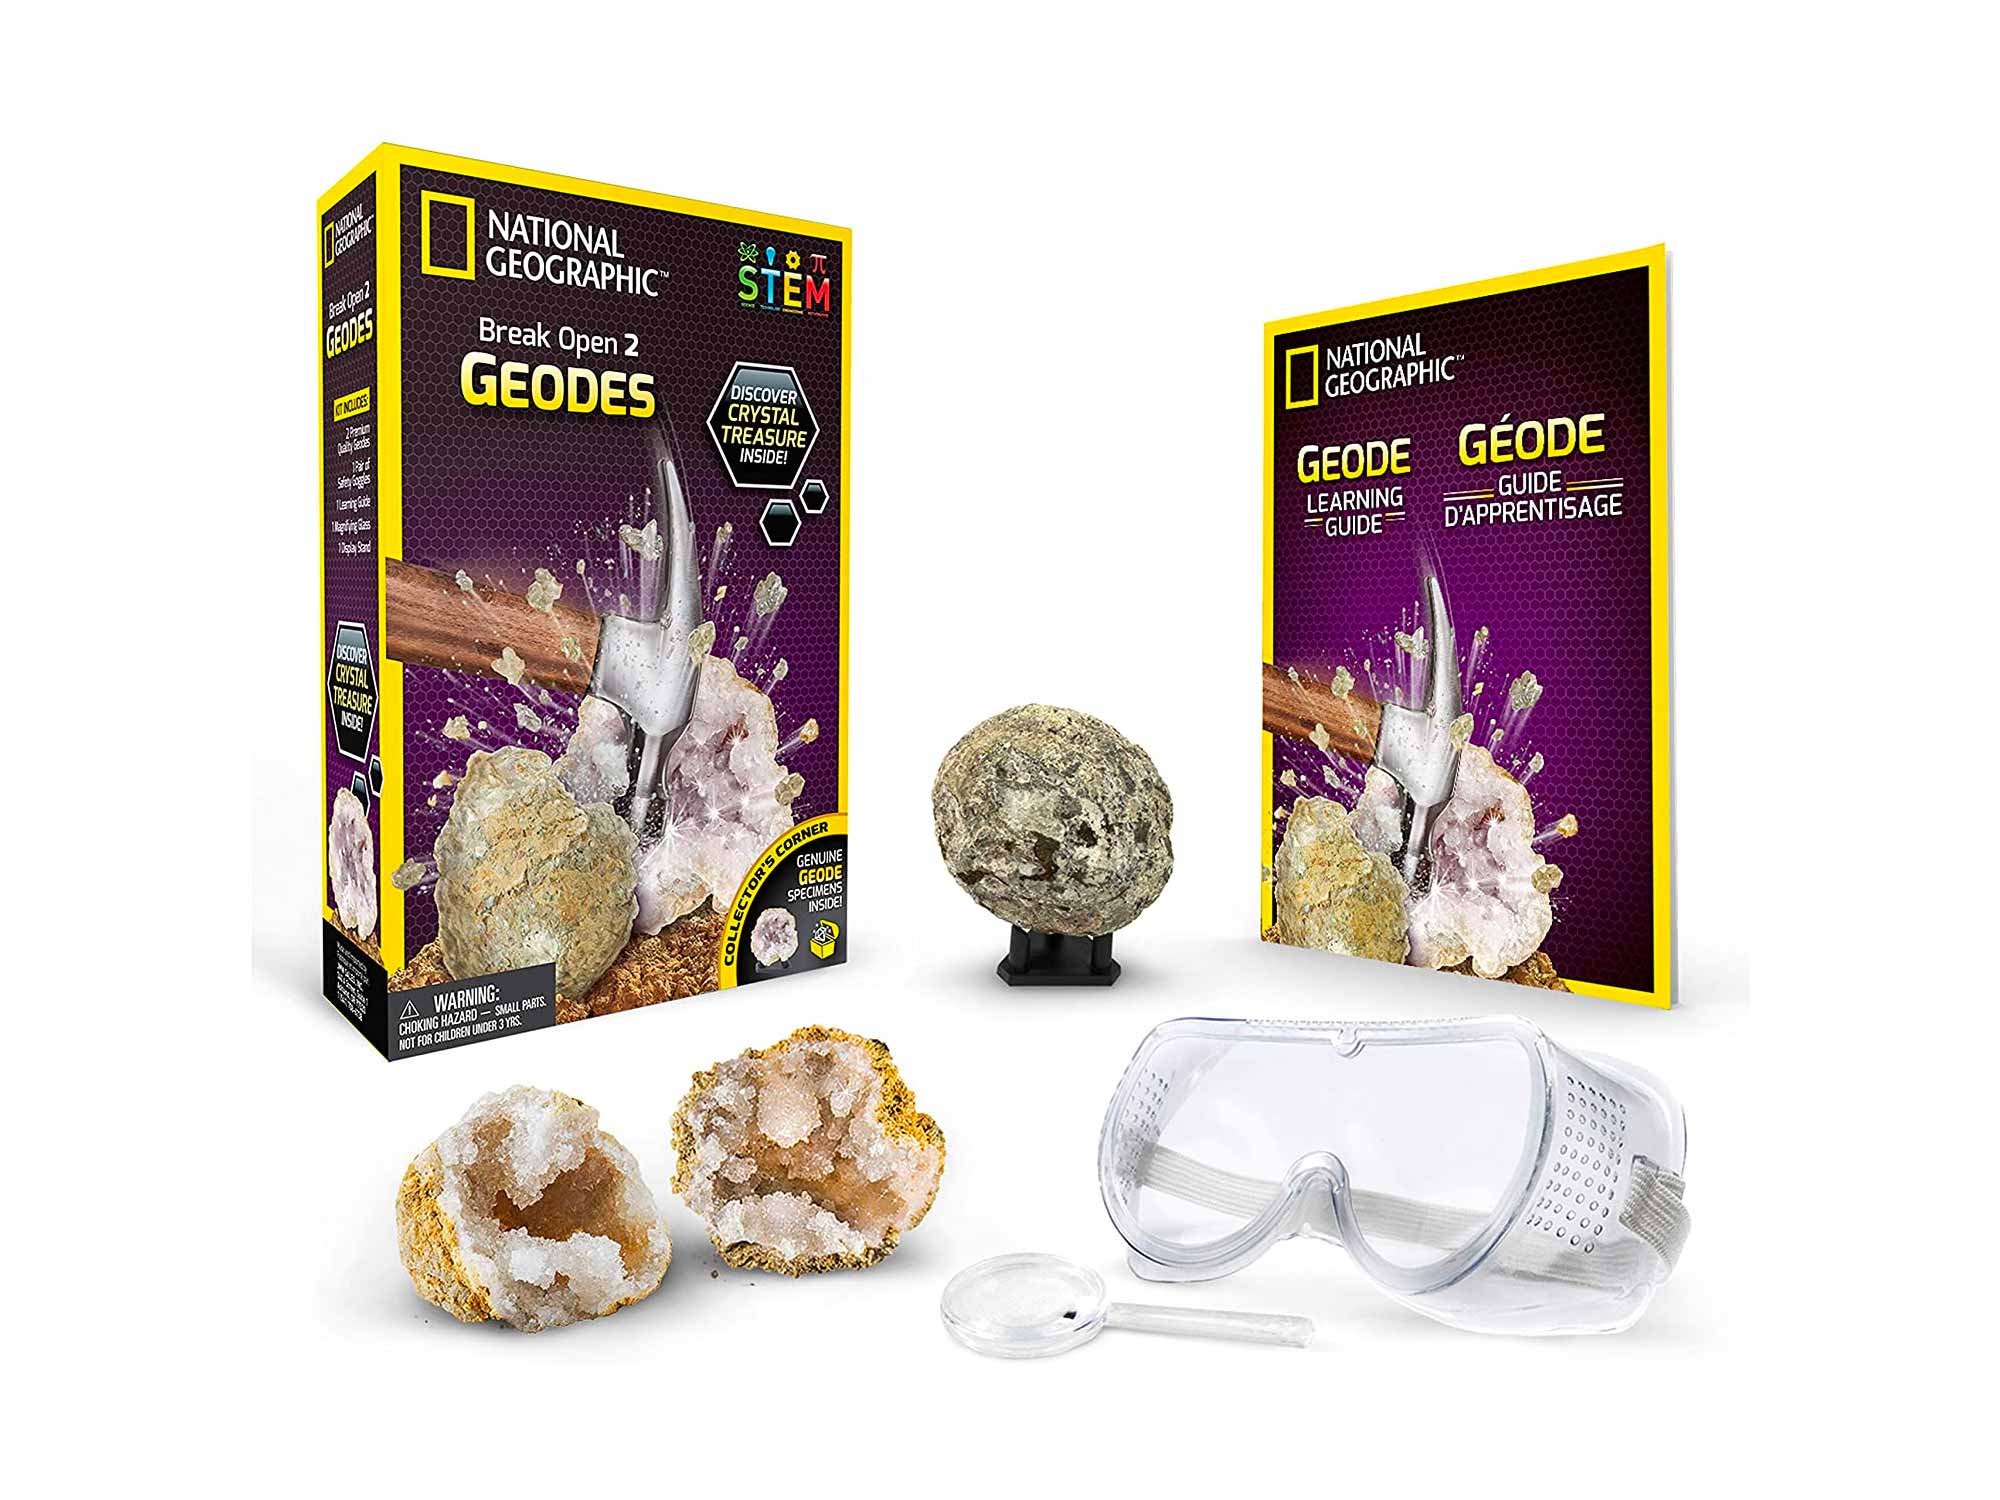 NATIONAL GEOGRAPHIC Break Open 2 Geodes Science Kit – Includes Goggles, Detailed Learning Guide and Display Stand - Great STEM Science gift for Mineralogy and Geology enthusiasts of any age